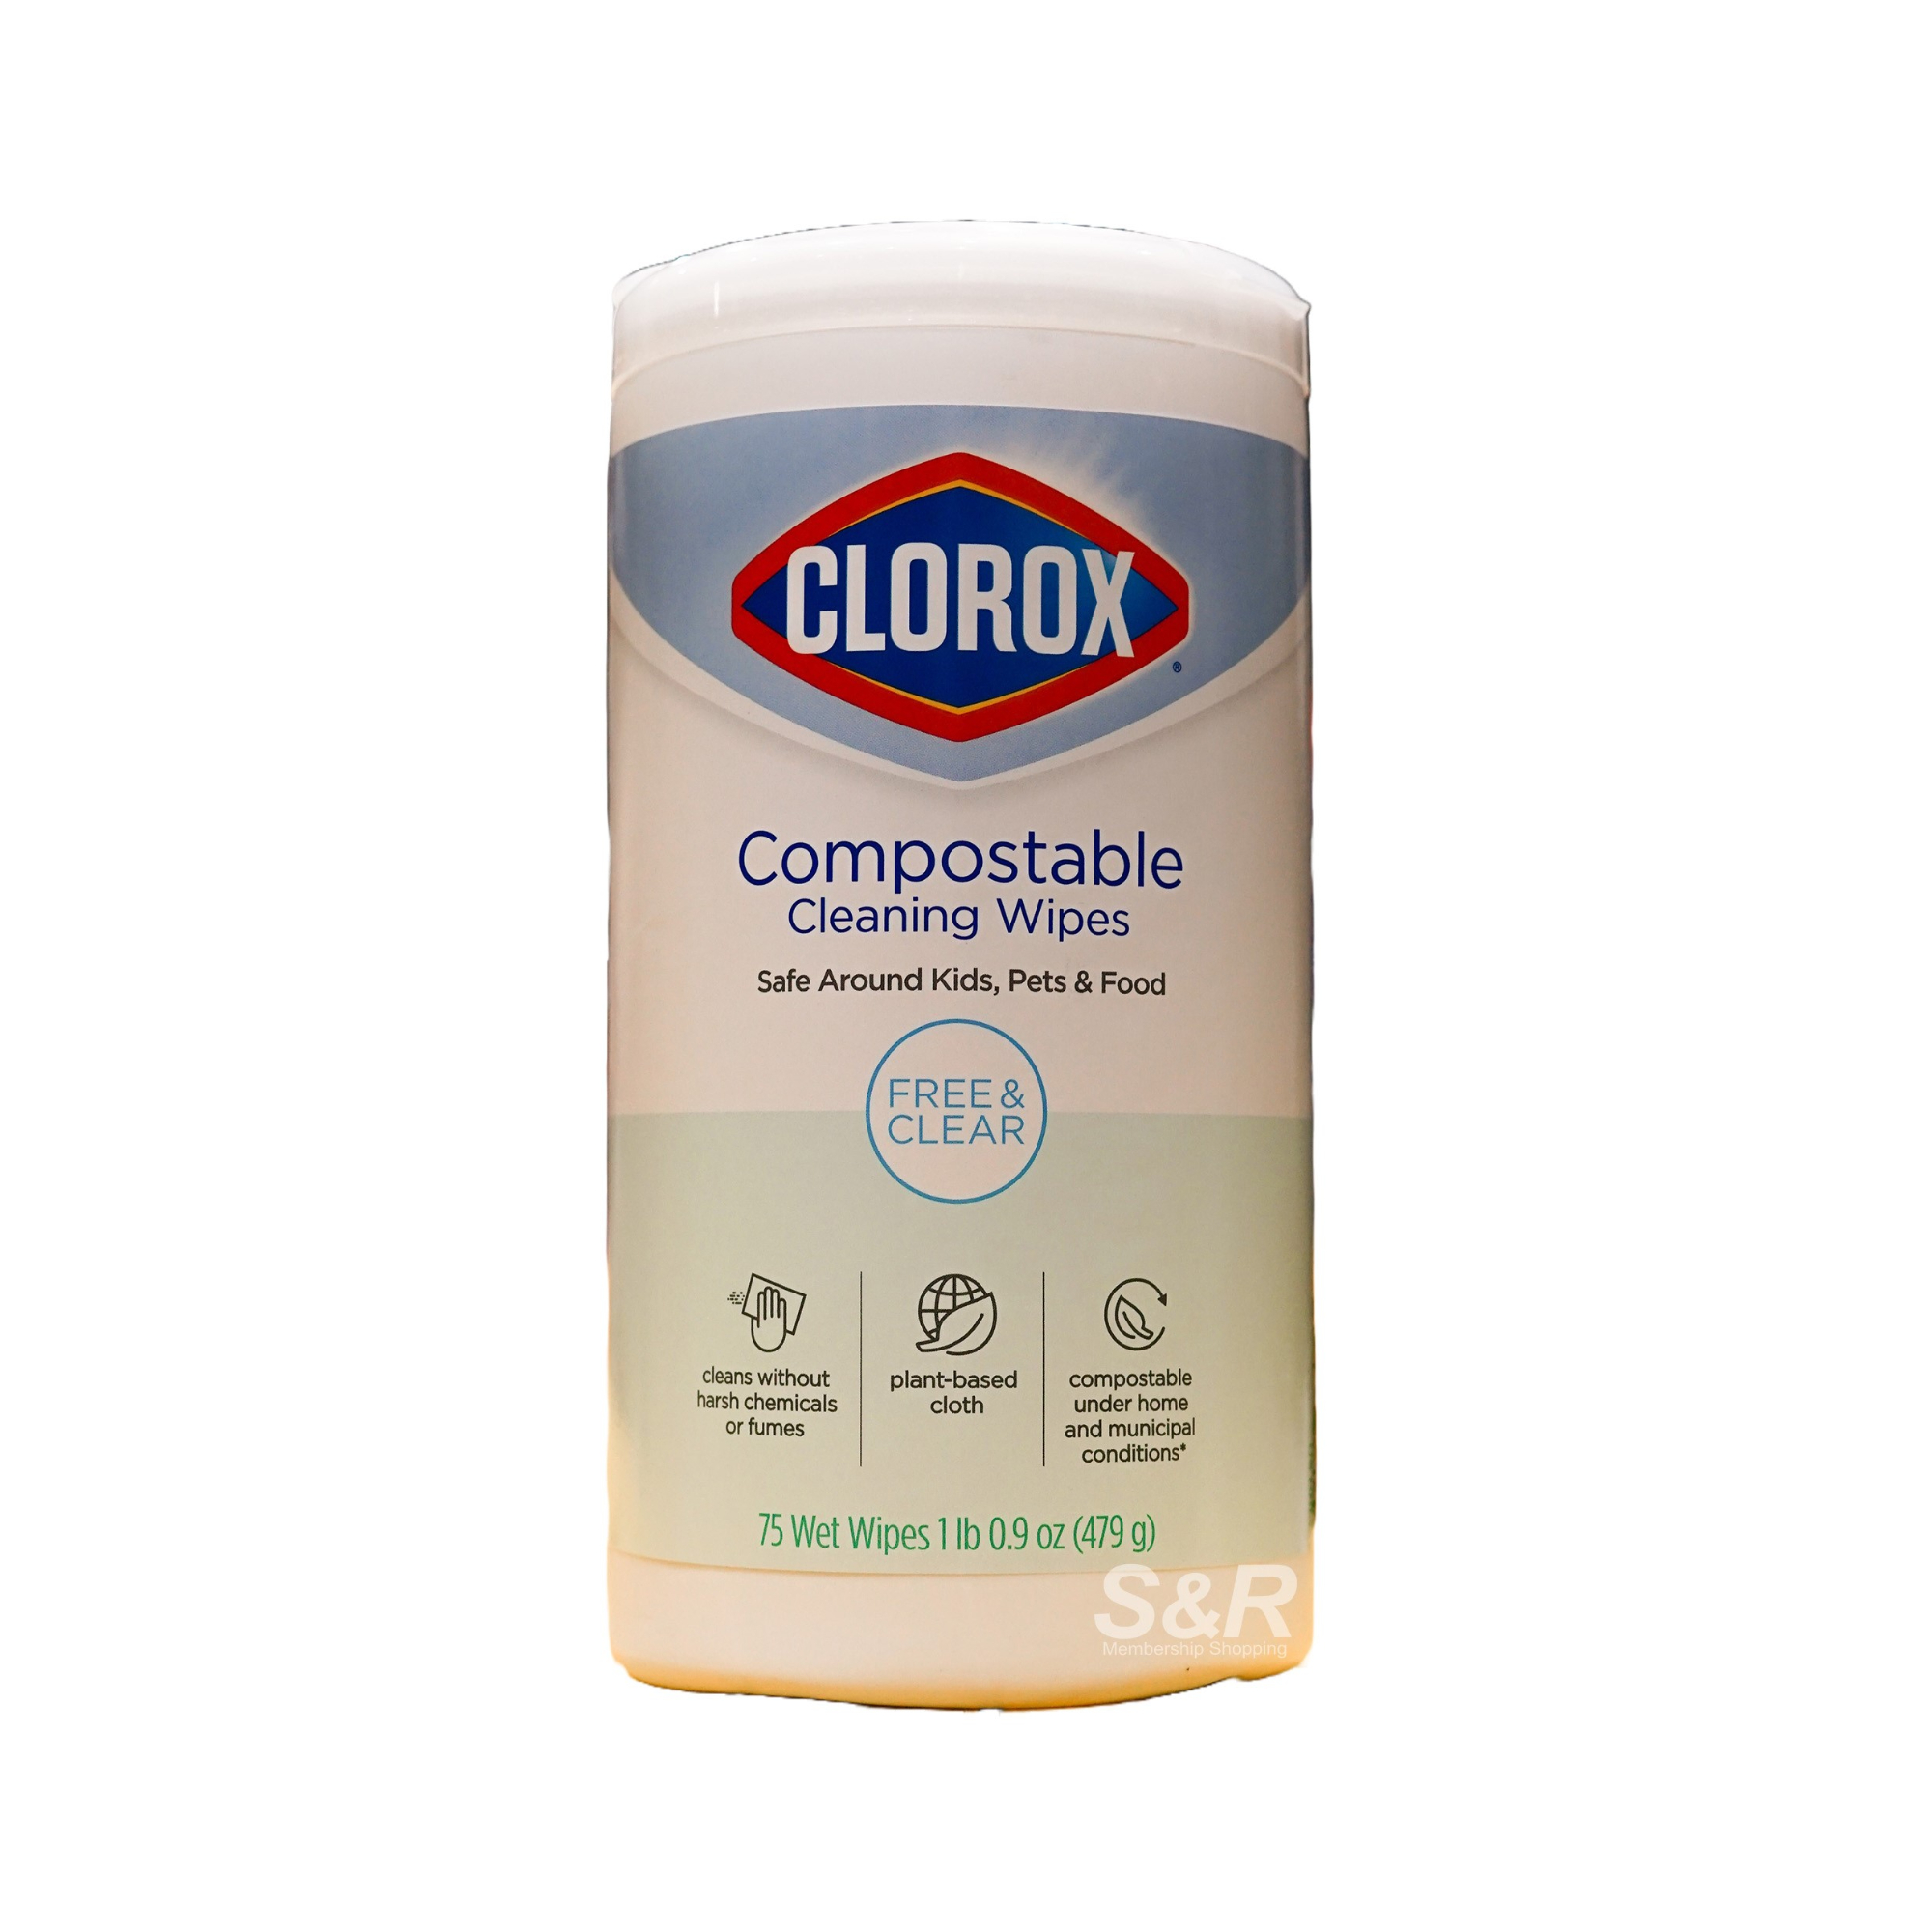 Clorox Free & Clear Compostable Cleaning Wipes 75pcs